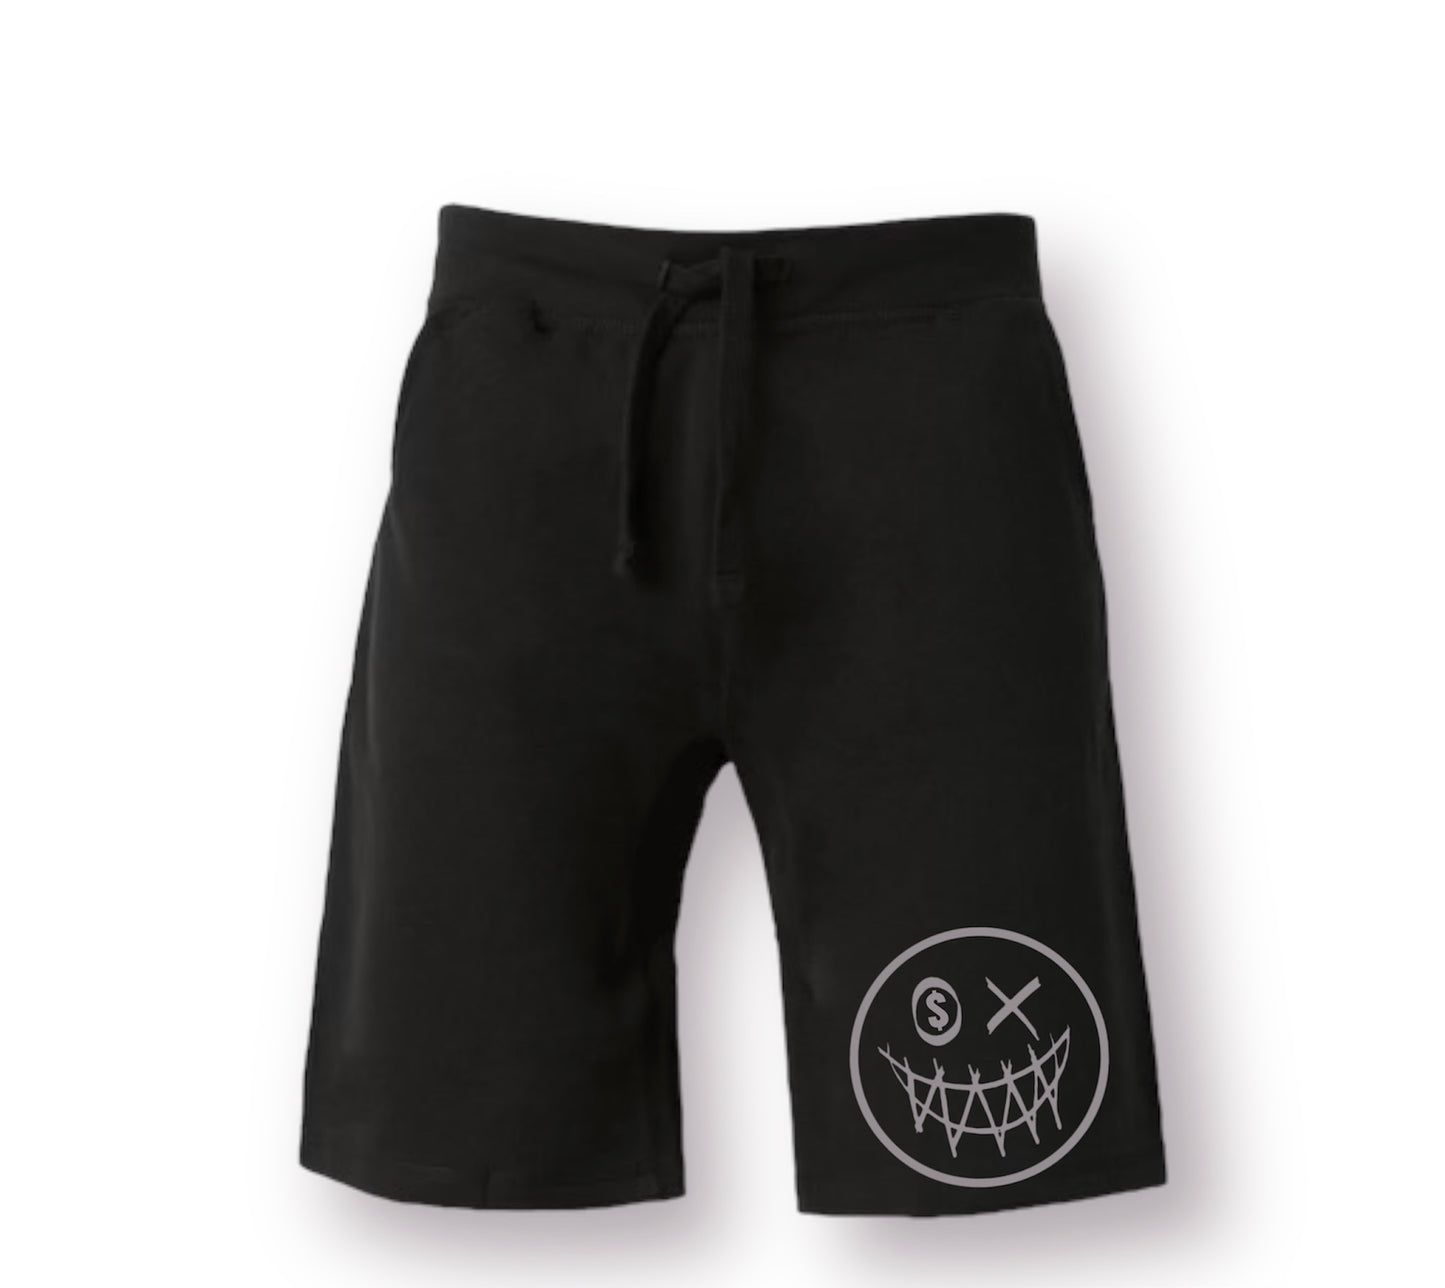 BSSW SMILEY FACE SHORTS